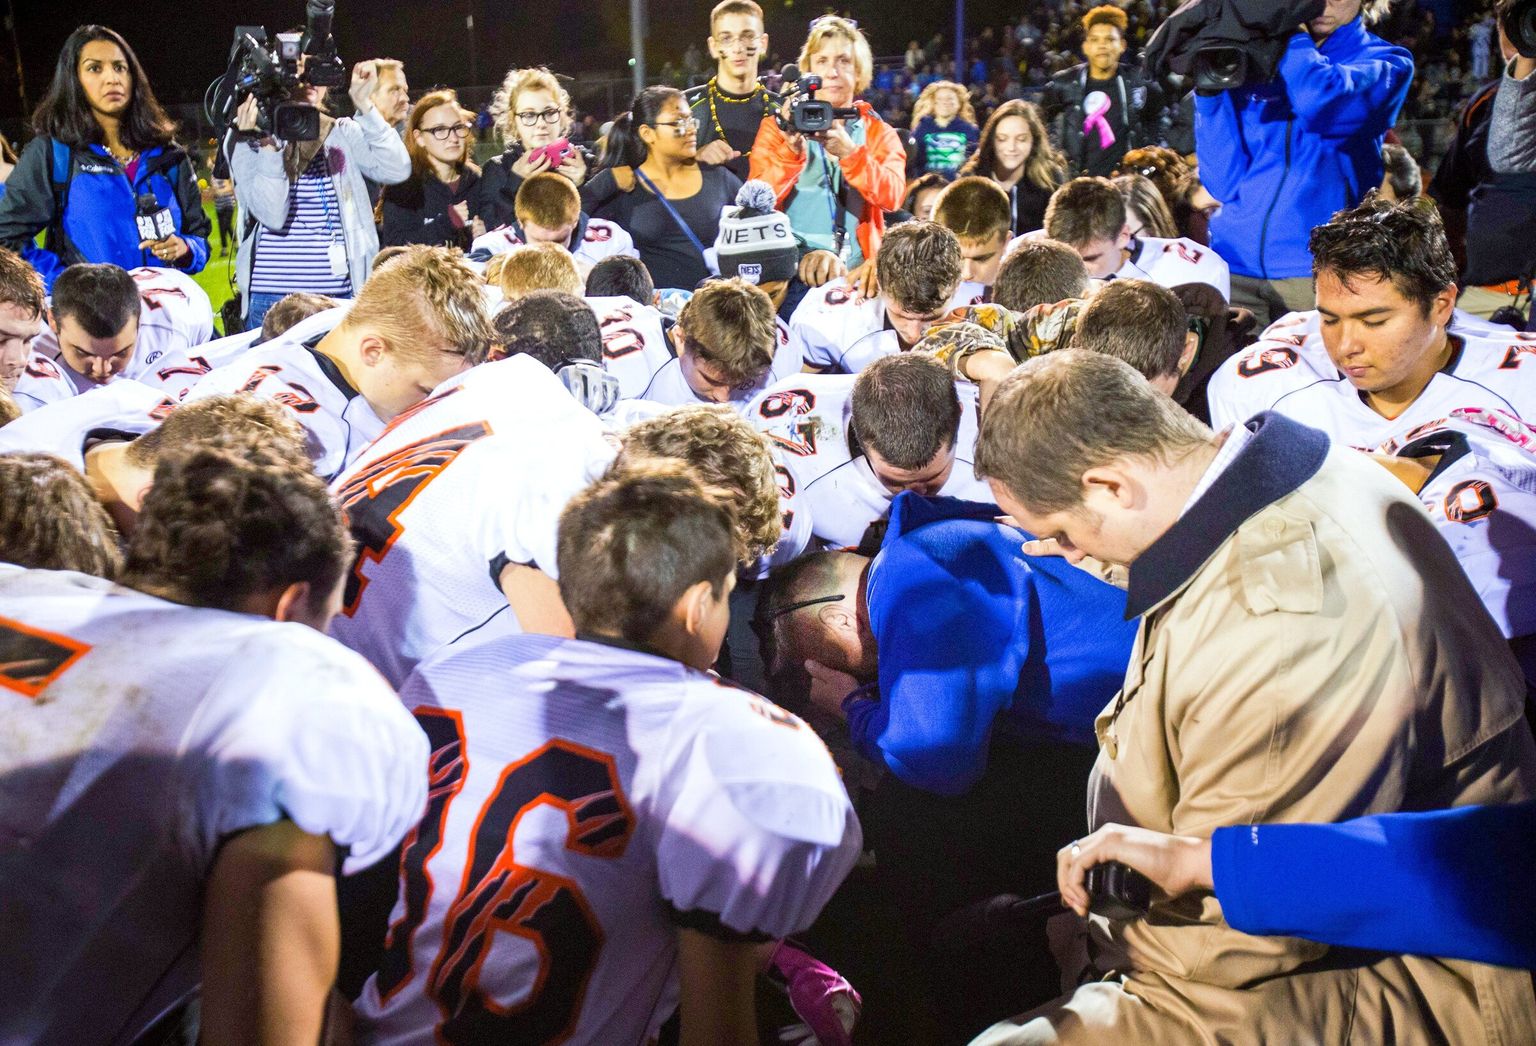 The story of the praying Bremerton coach keeps getting more surreal (seattletimes.com)